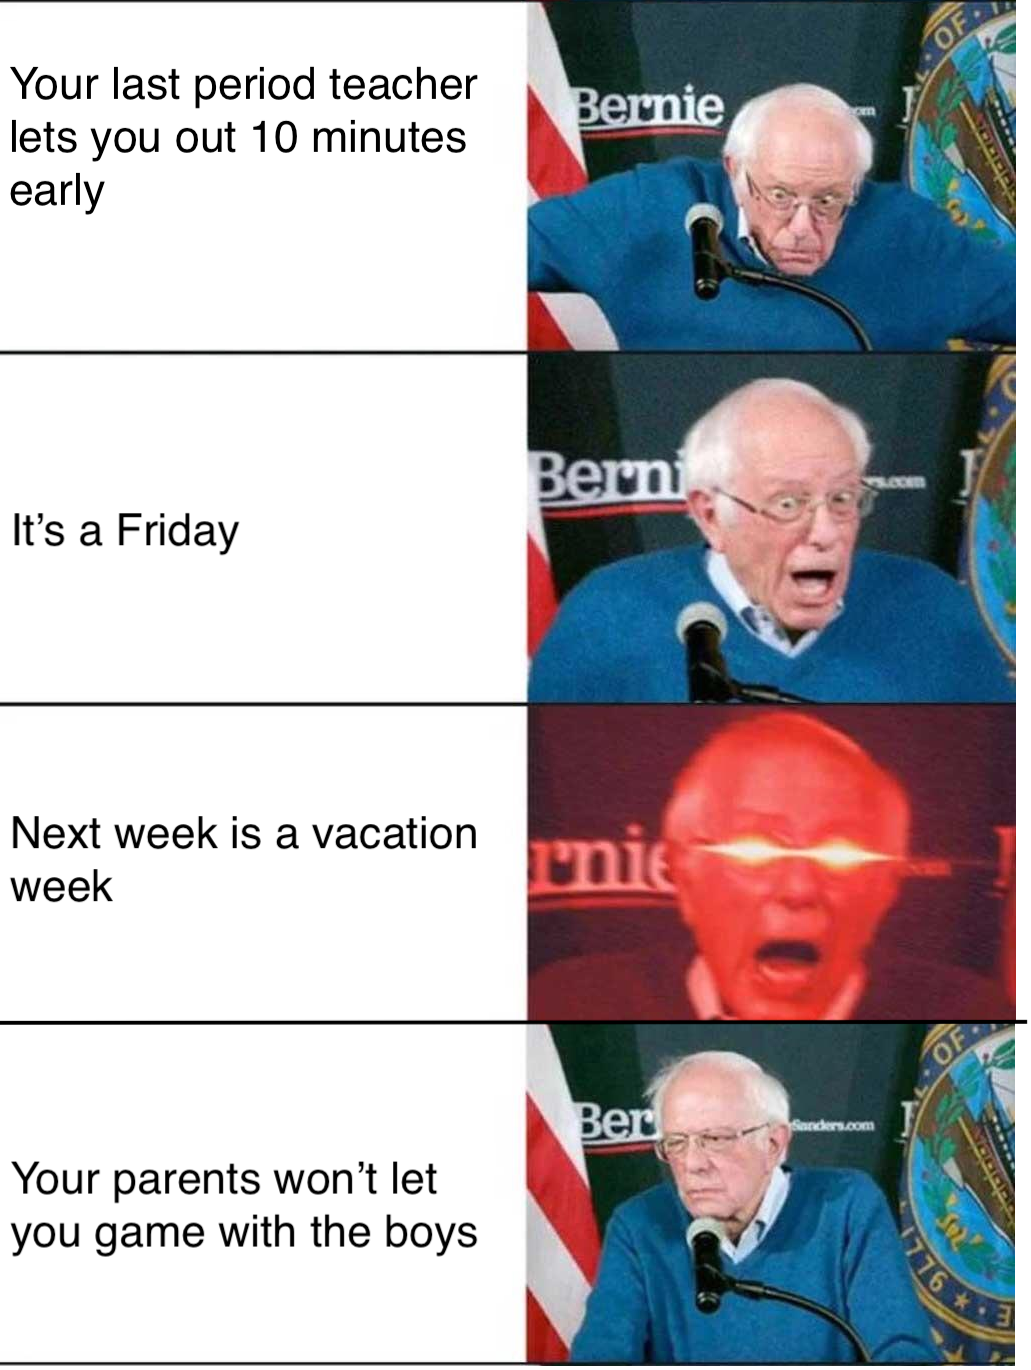 funny memes - we were on the verge of greatness - Bernie Your last period teacher lets you out 10 minutes early Berni It's a Friday Next week is a vacation week nie Ber Your parents won't let you game with the boys 7760